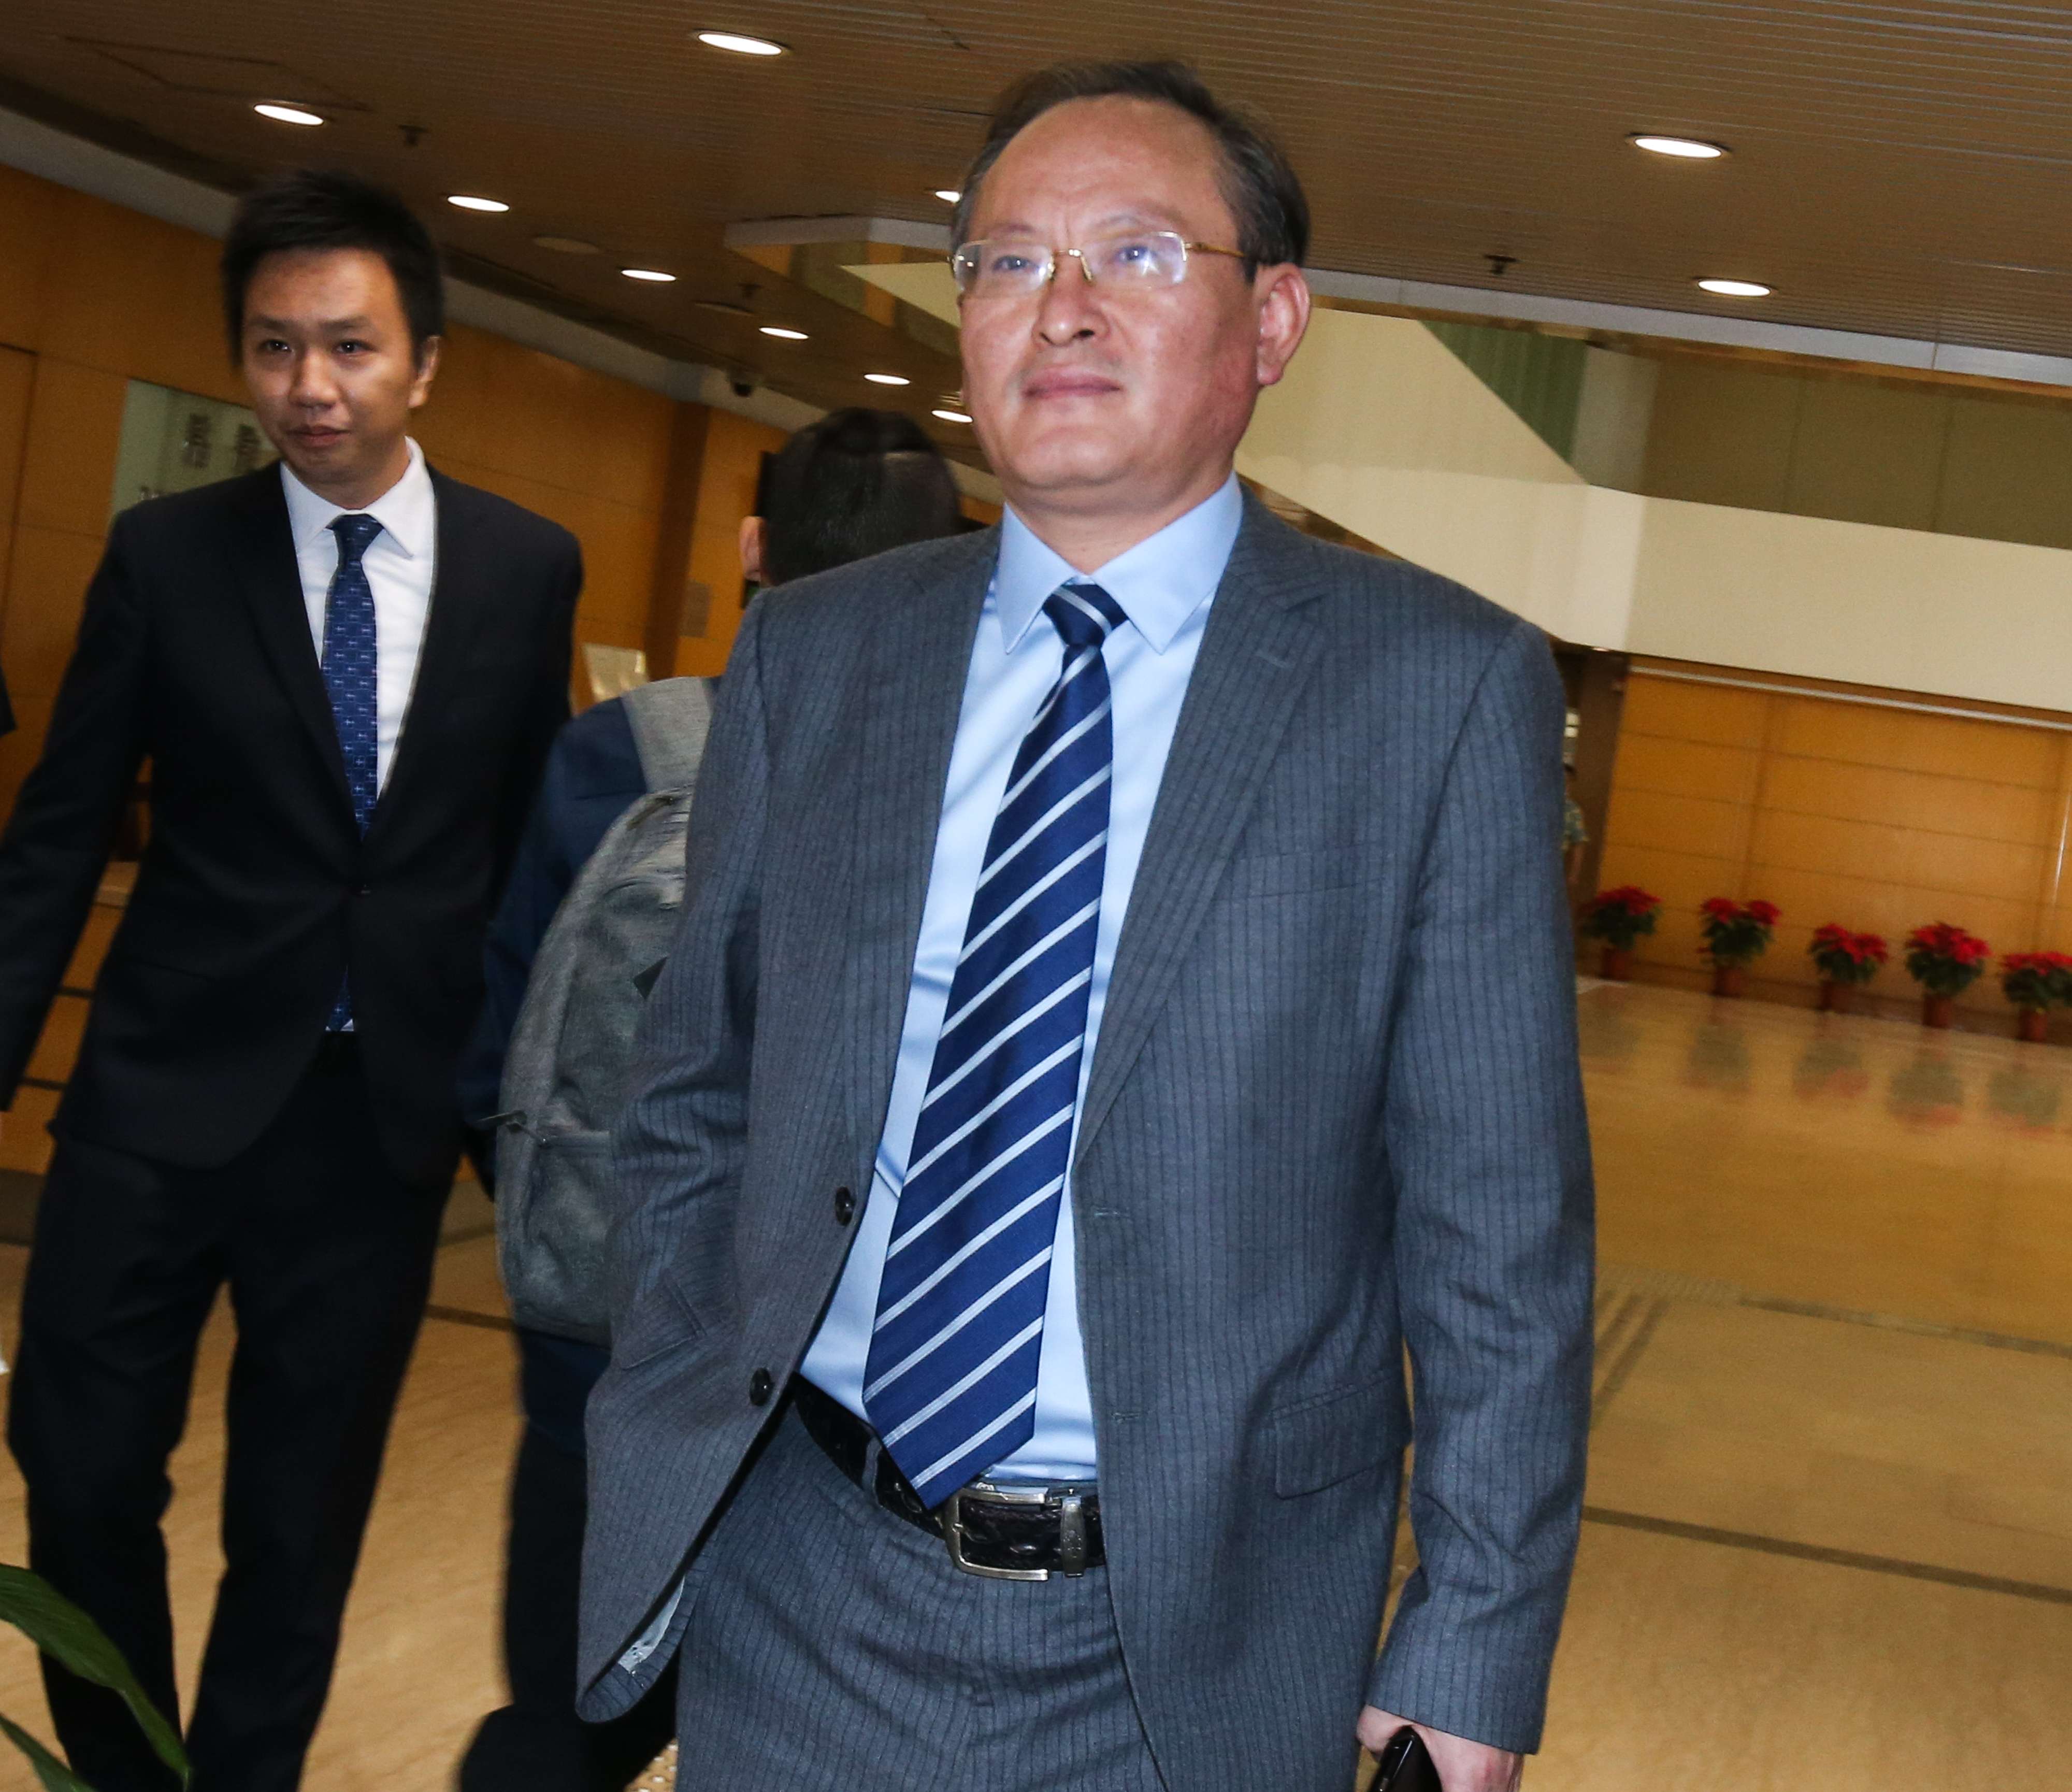 Si Rongbin pleaded not guilty to 44 summonses over his role in ATV’s failure to pay staff wages and termination payments worth a total of HK$730,000 within the legal seven-day limit. Photo: David Wong